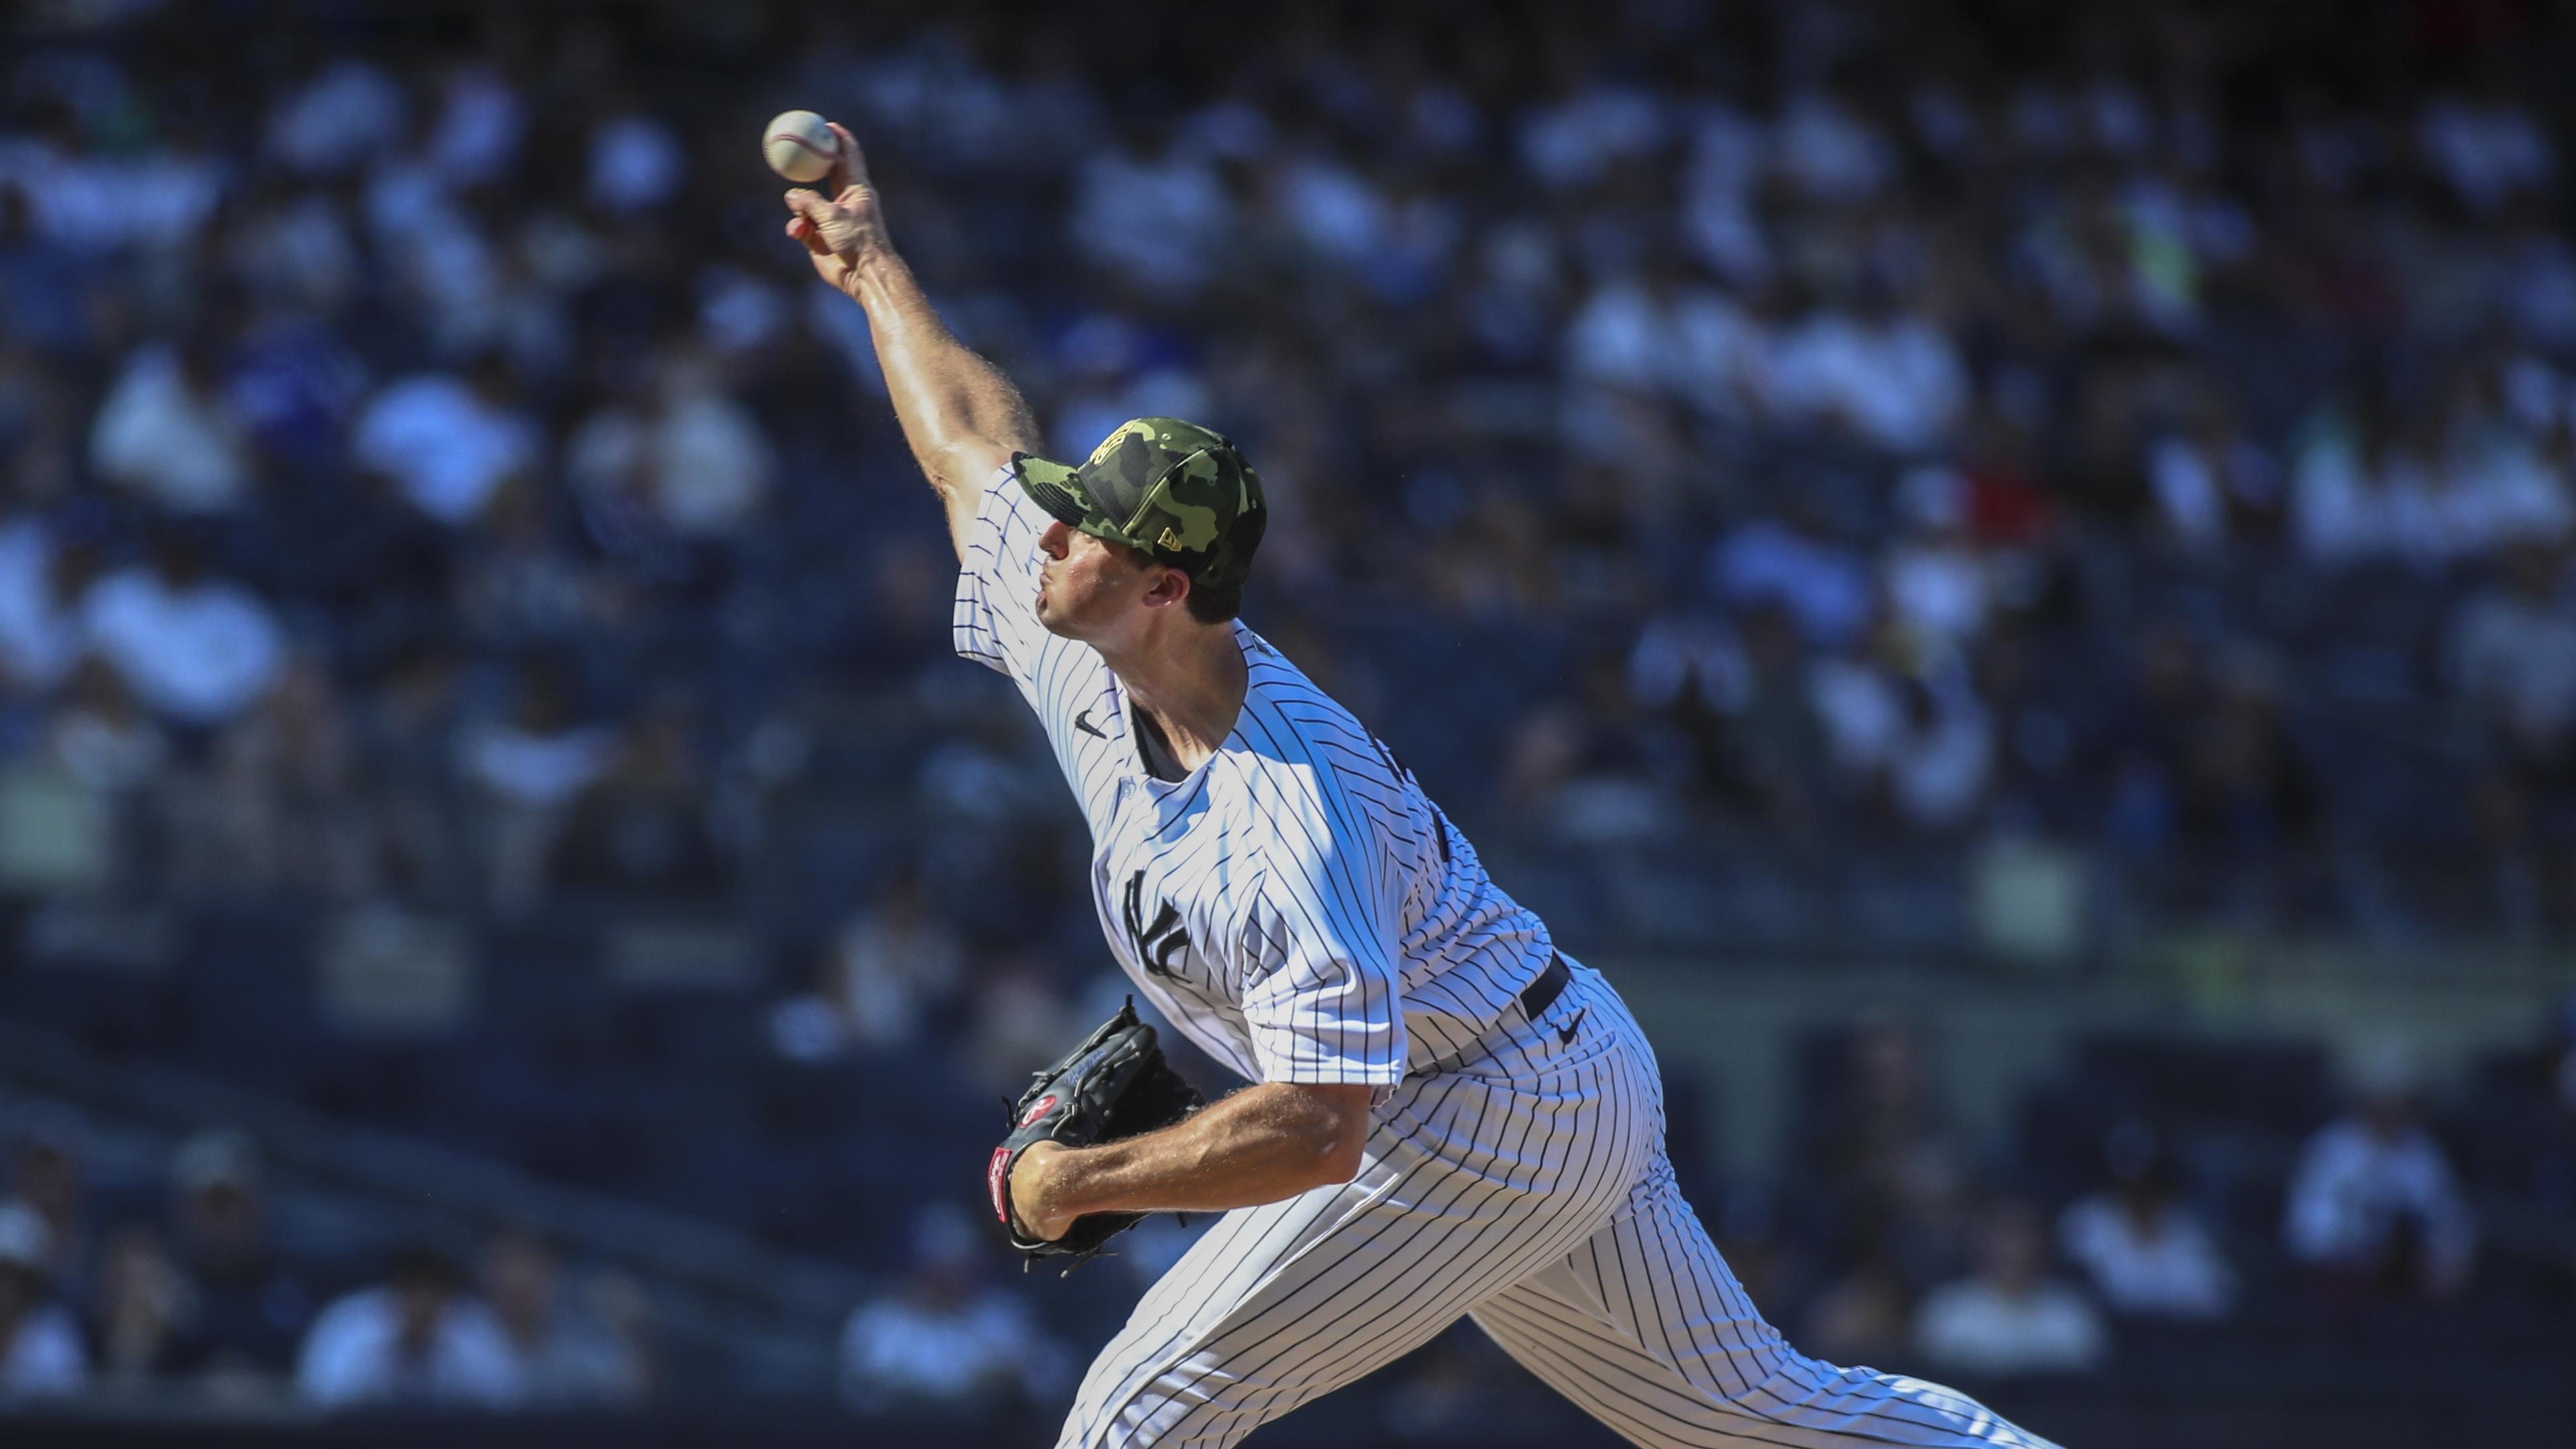 May 21, 2022; Bronx, New York, USA; New York Yankees relief pitcher Clay Holmes (35) pitches in the ninth inning against the Chicago White Sox at Yankee Stadium. Mandatory Credit: Wendell Cruz-USA TODAY Sports / © Wendell Cruz-USA TODAY Sports